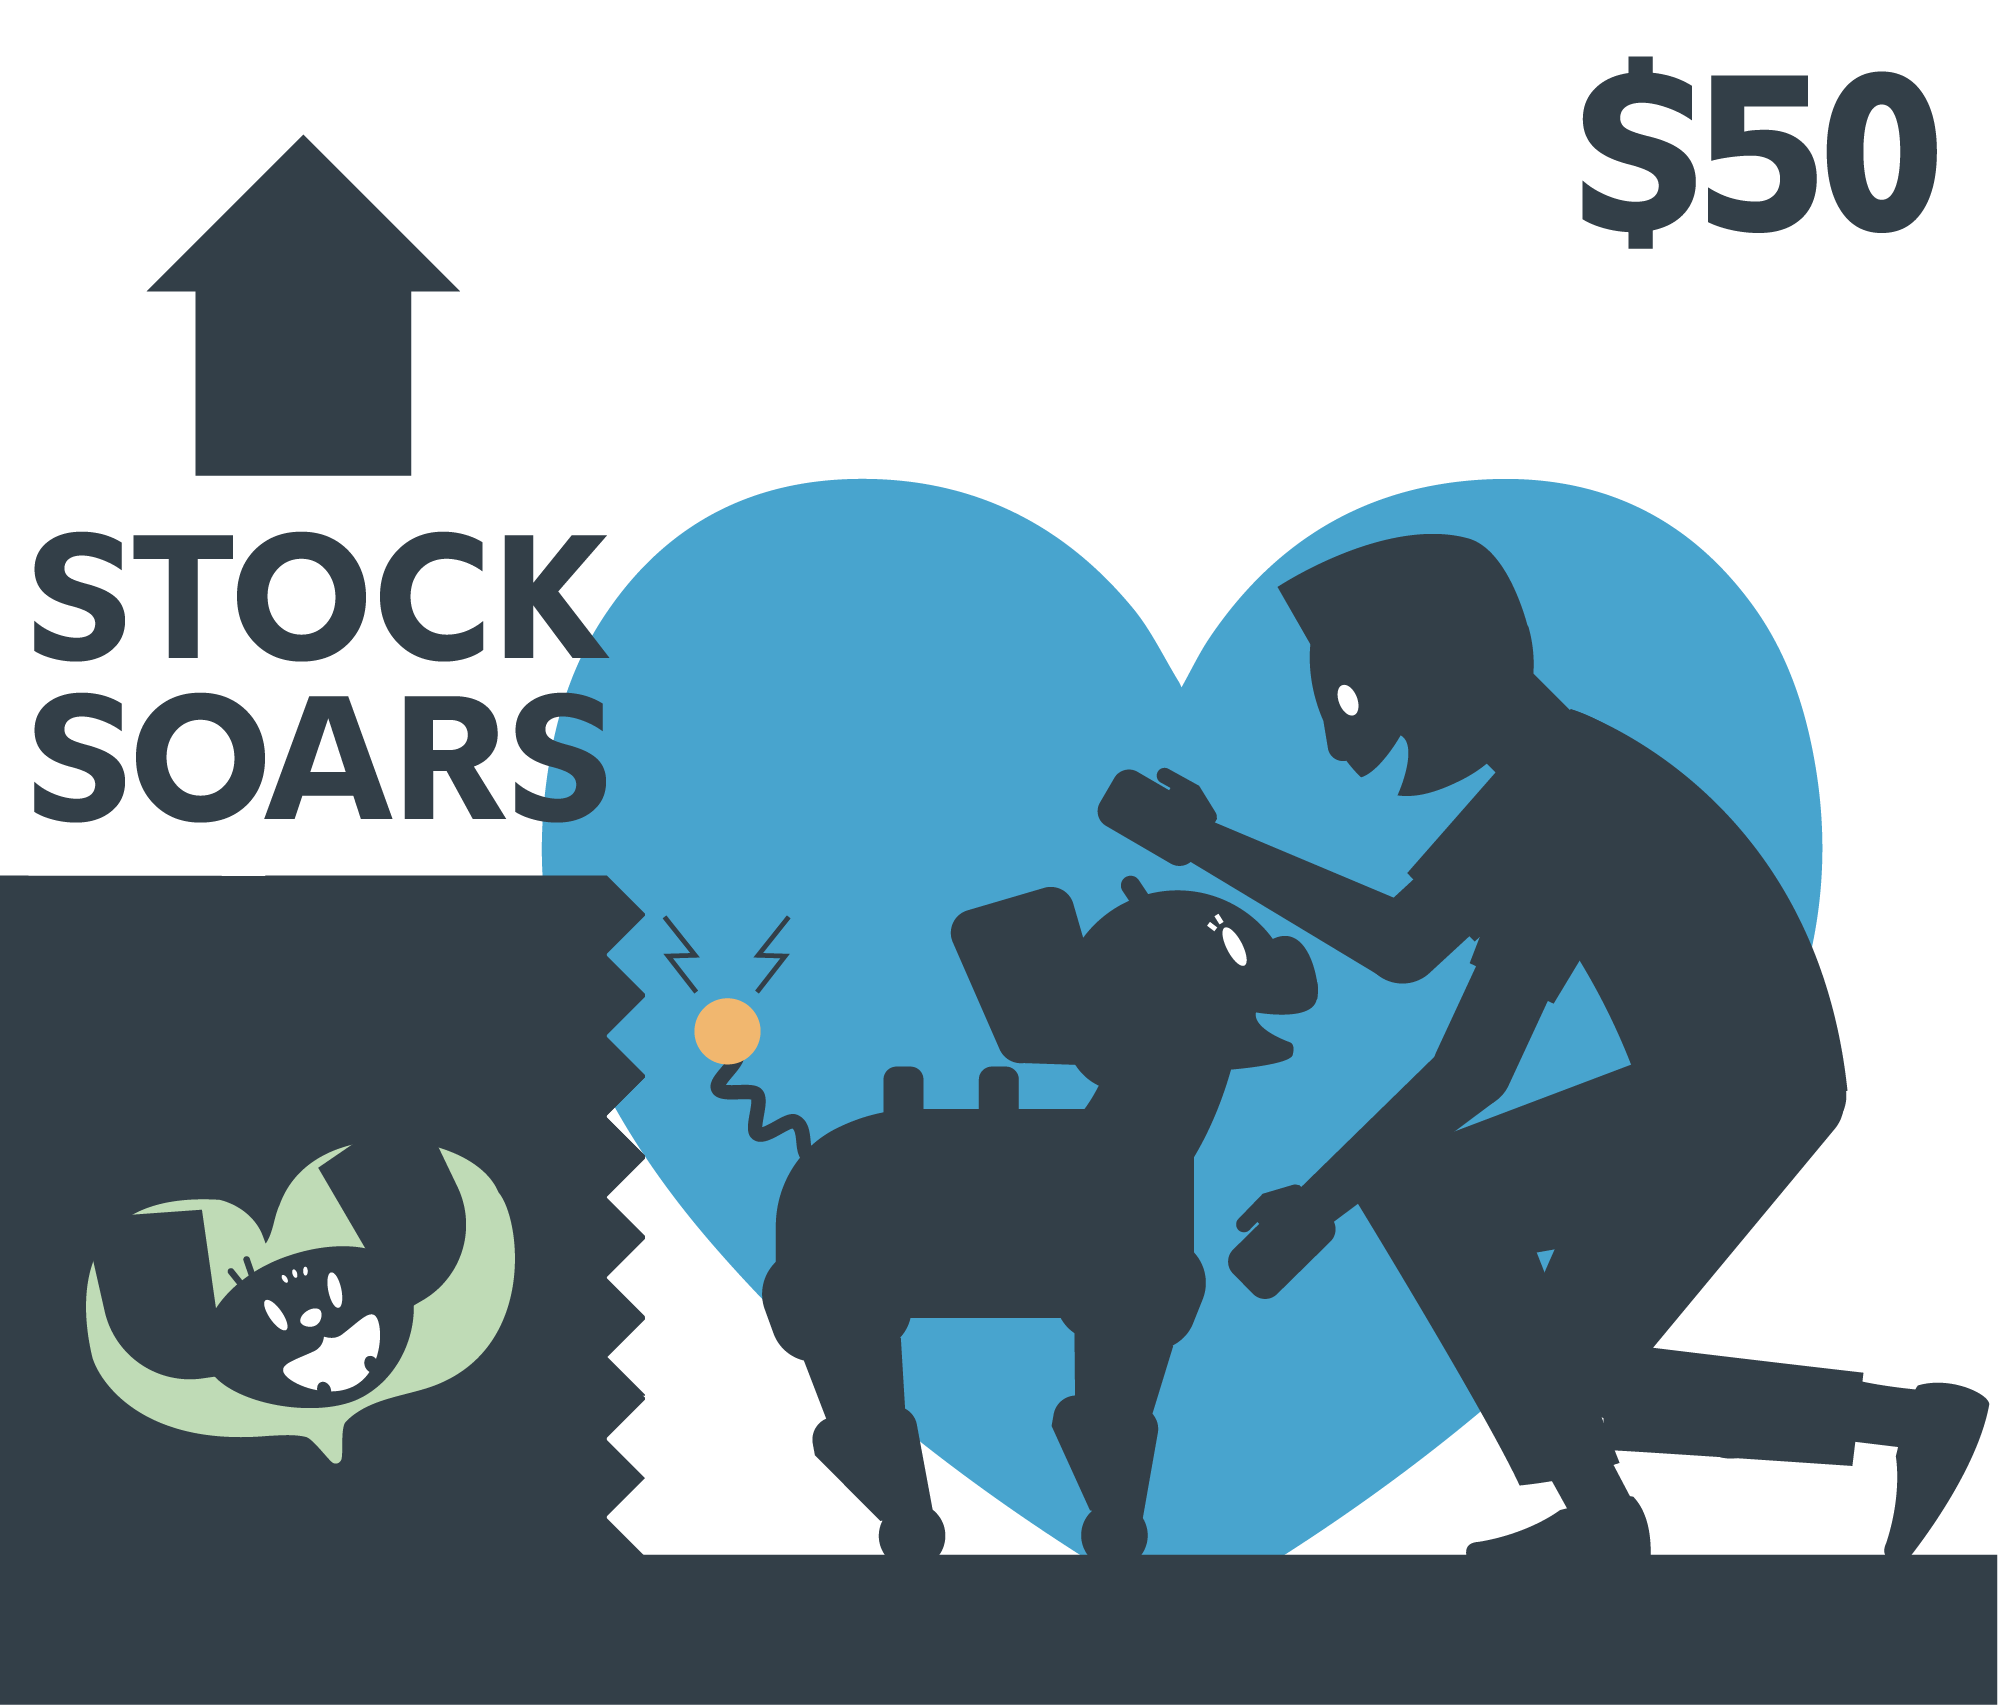 Image of a robotic dog being pet by a person as the stock soars